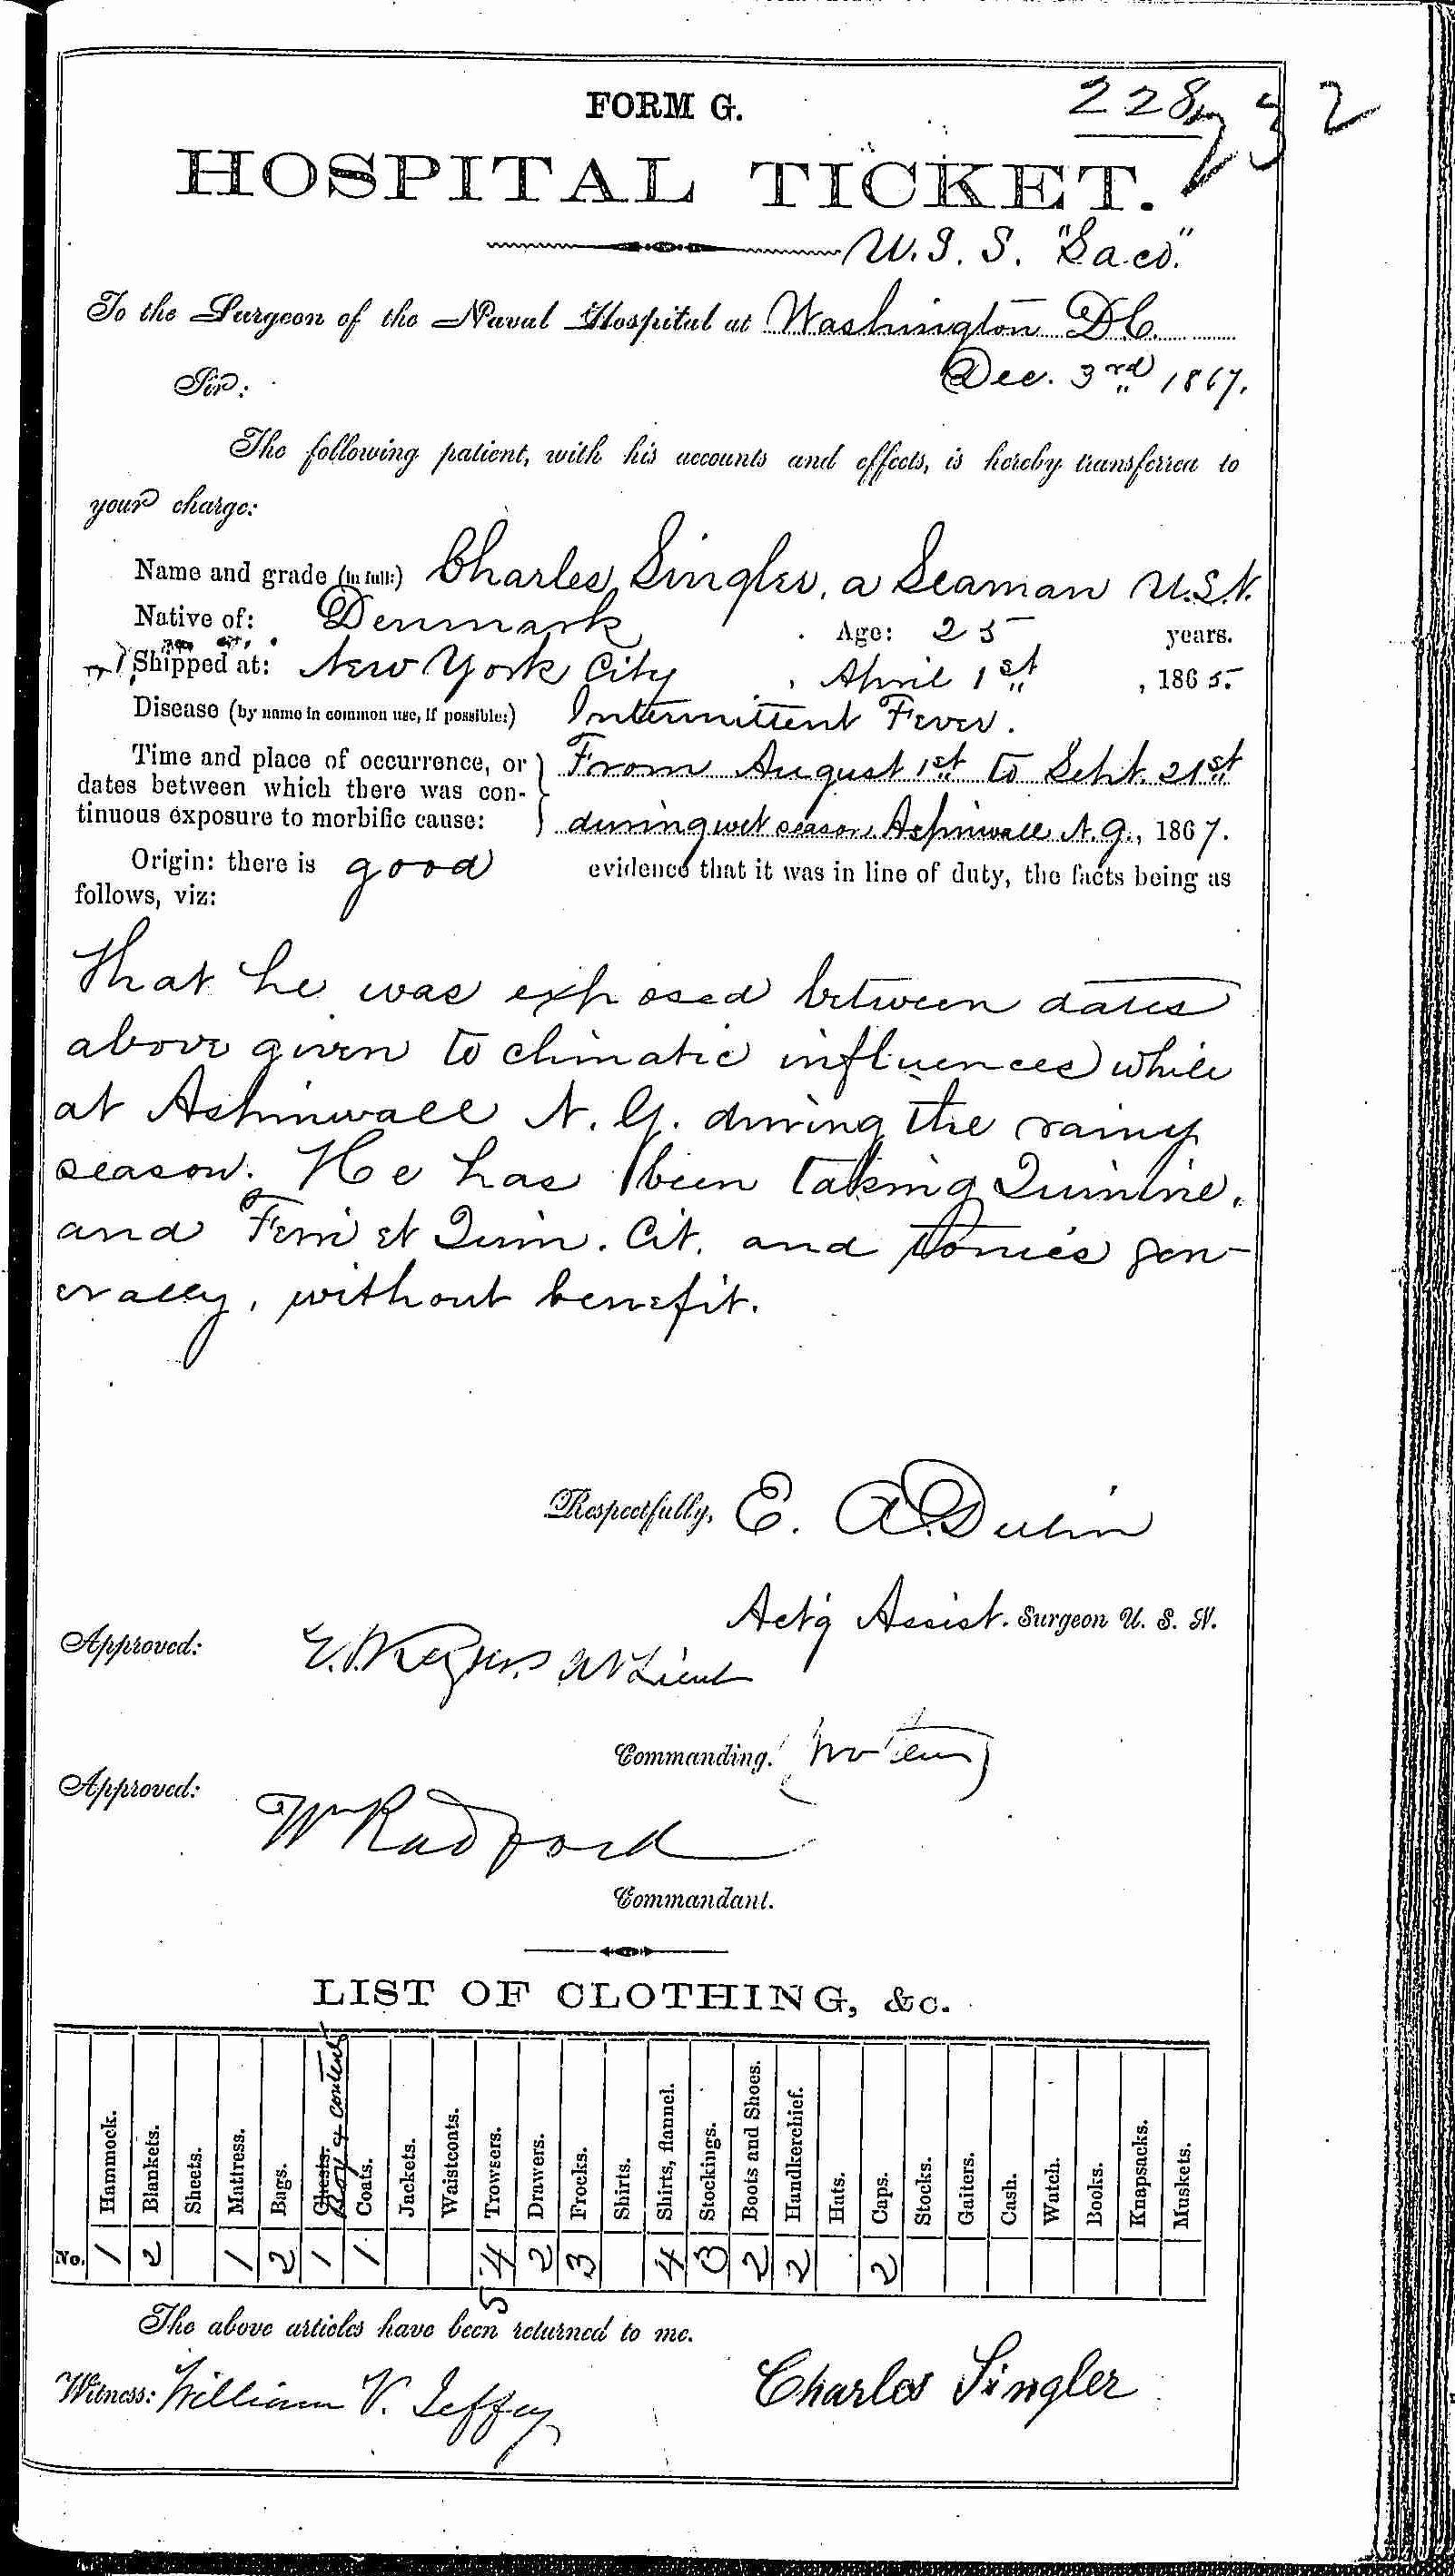 Entry for Charles Singler (page 1 of 2) in the log Hospital Tickets and Case Papers - Naval Hospital - Washington, D.C. - 1866-68